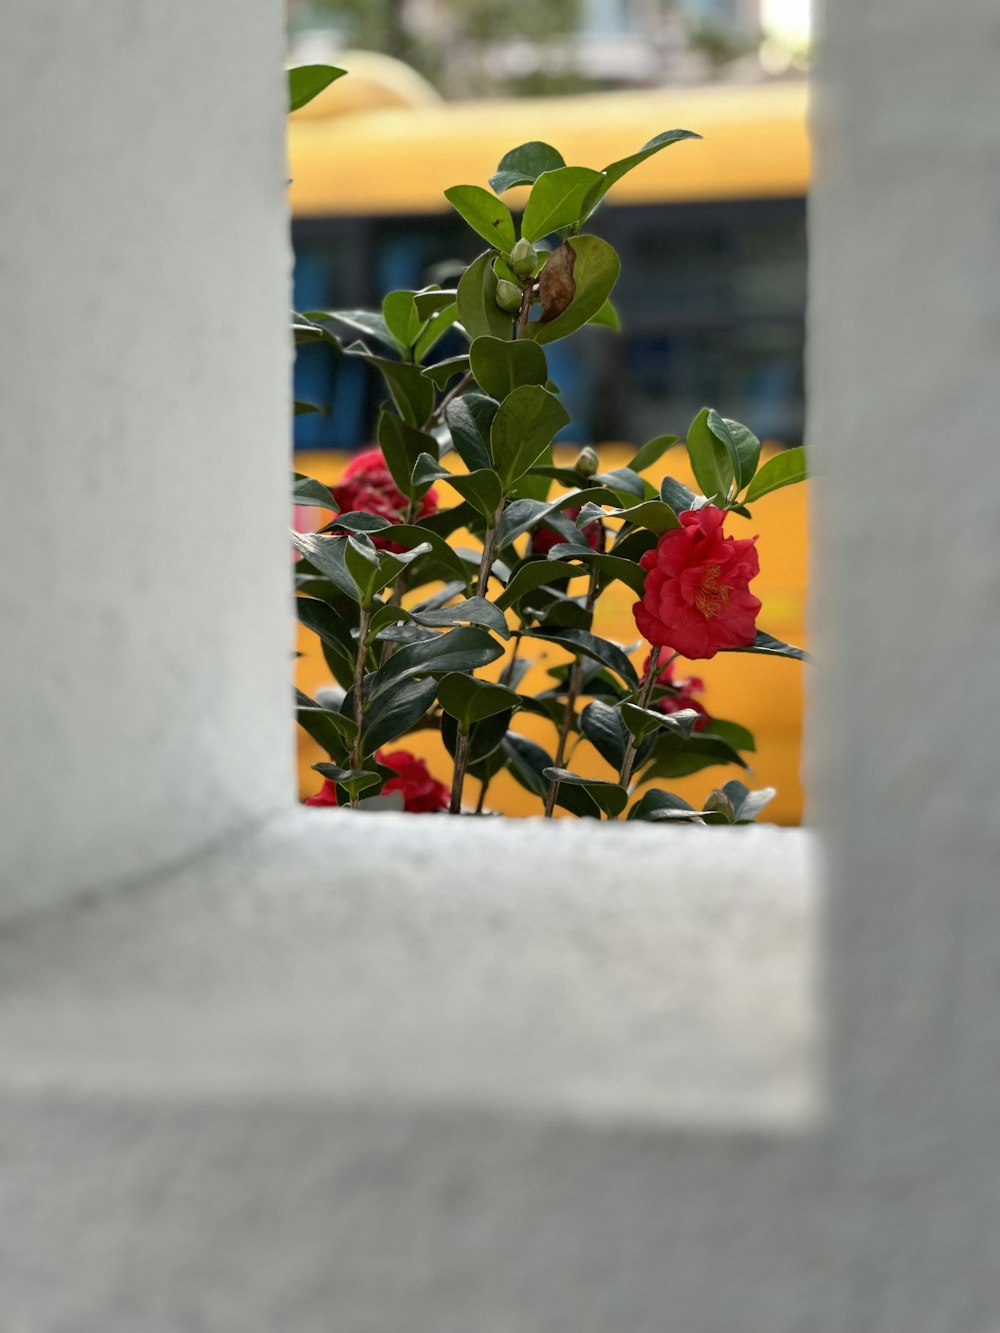 a red rose in a white vase with a yellow bus in the background